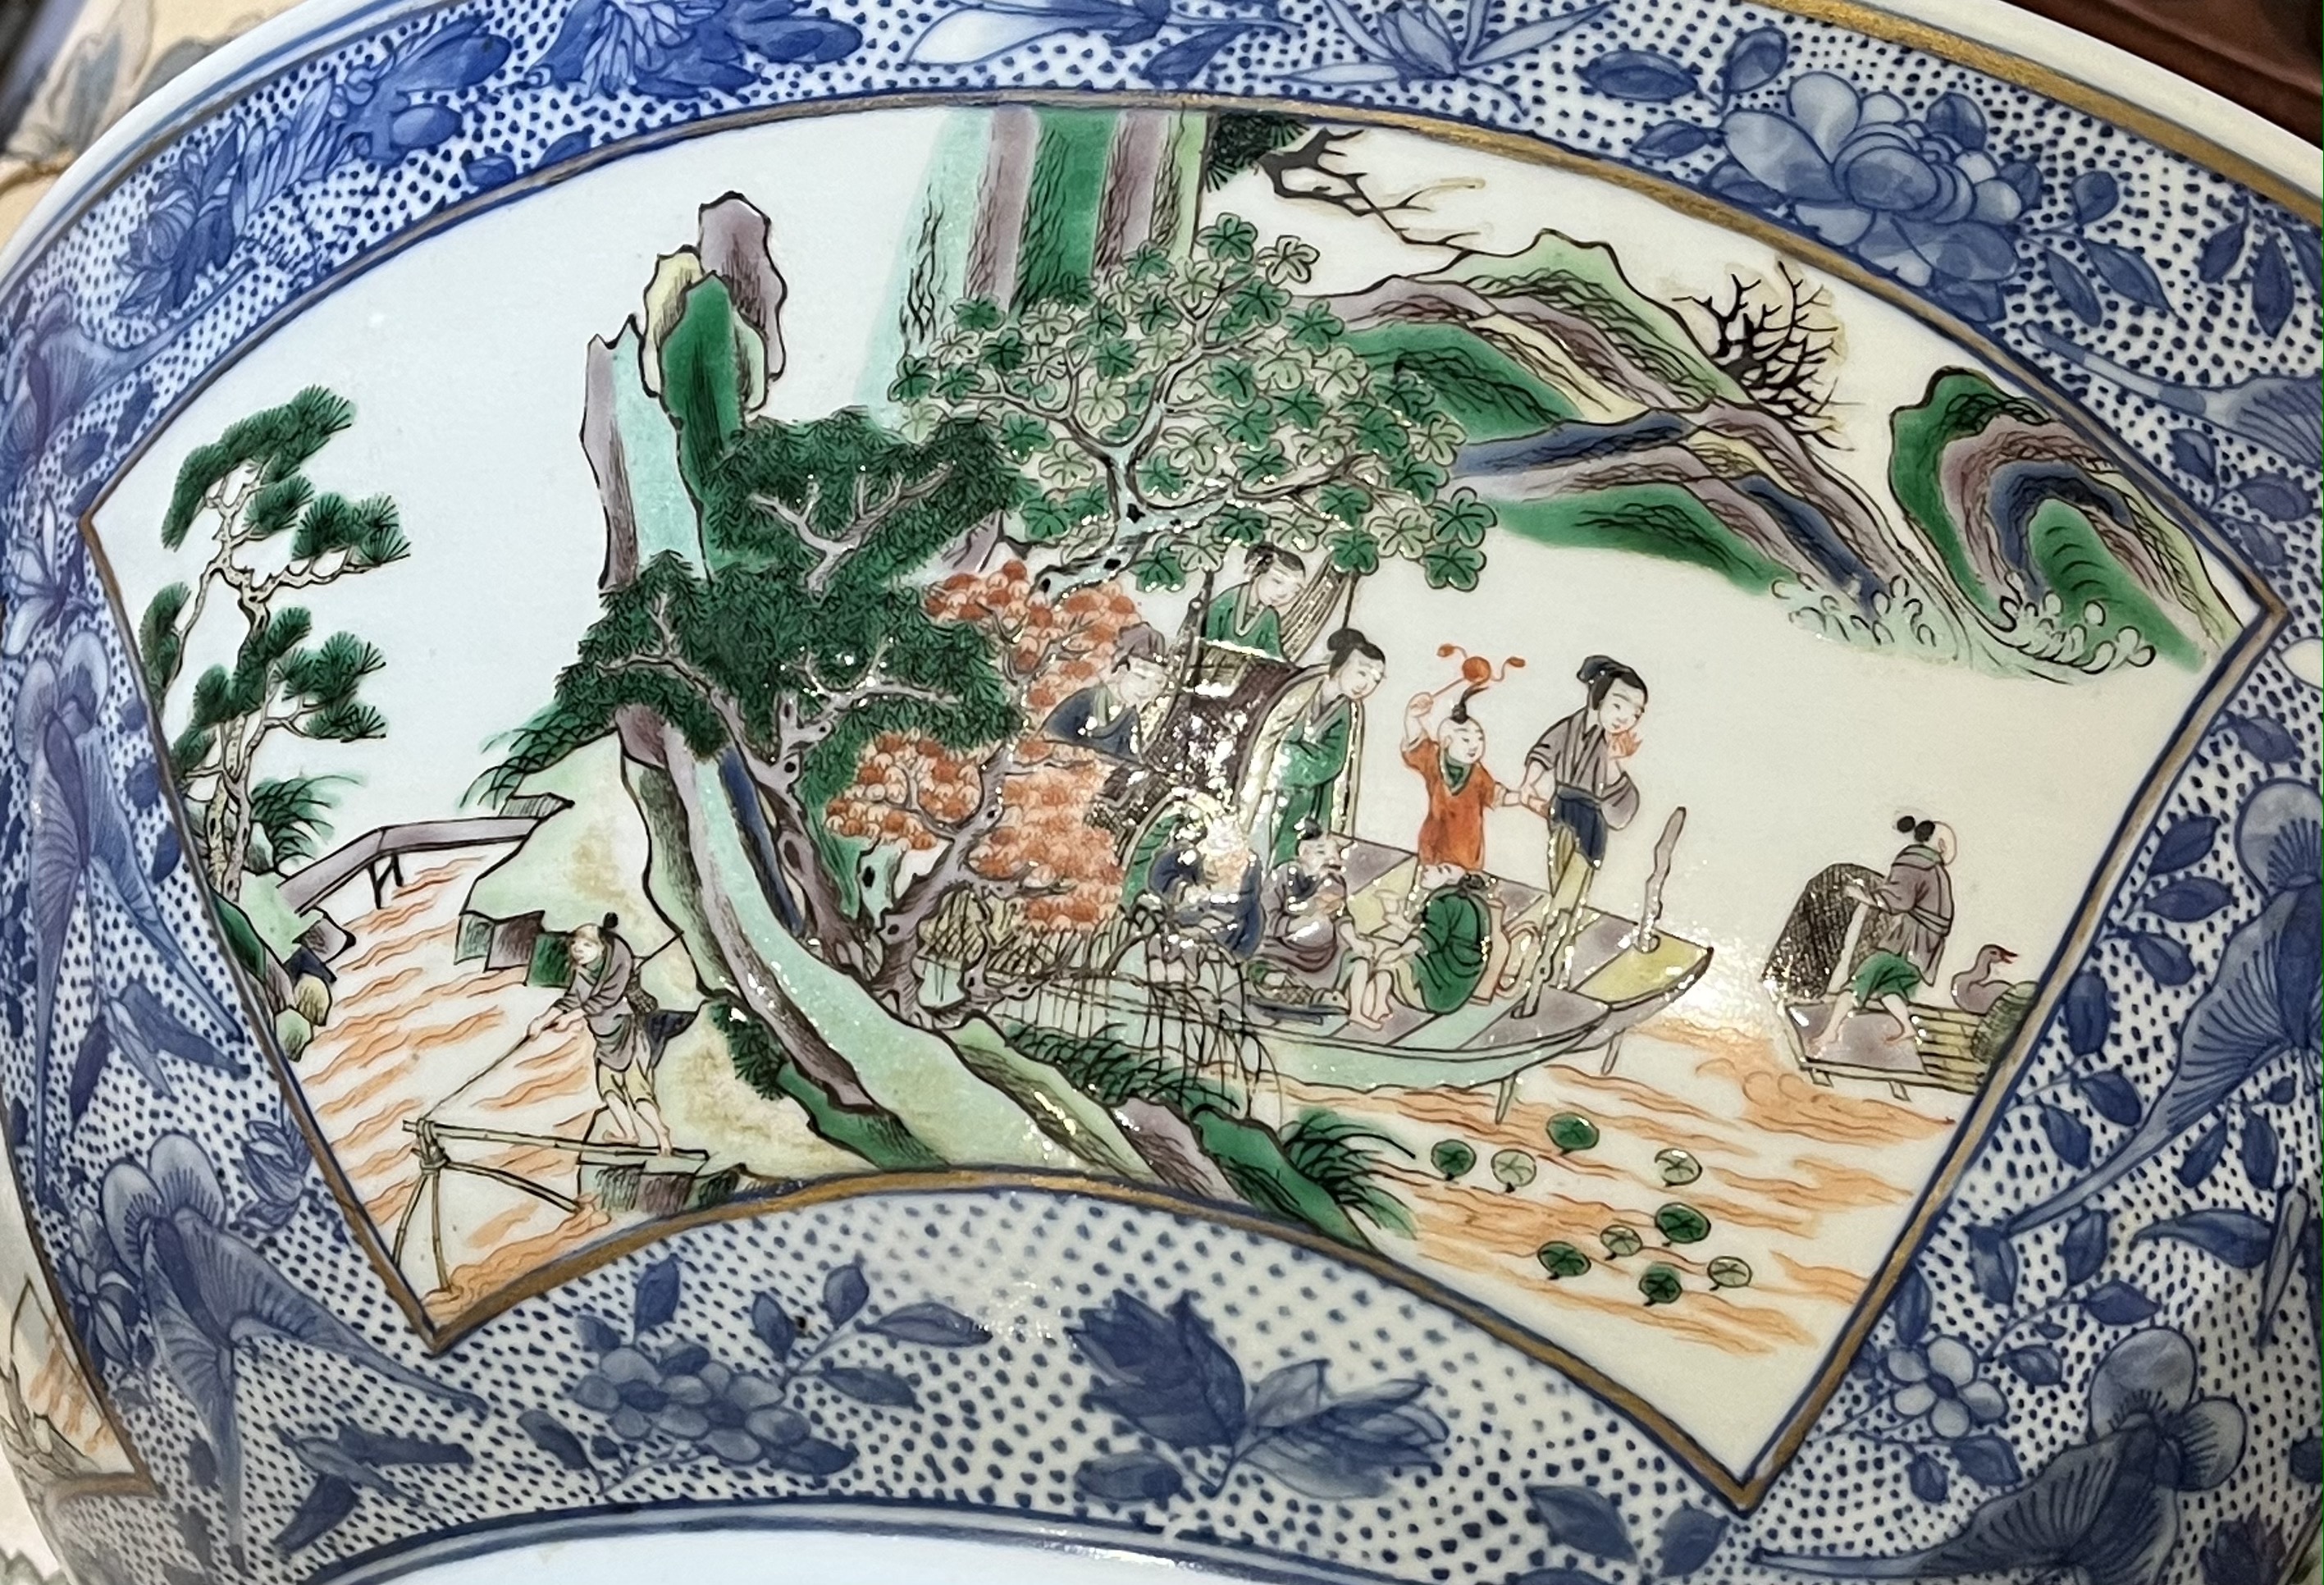 A LARGE CHINESE UNDERGLAZE-BLUE AND 'FAMILLE-VERTE' PUNCHBOWL, QING DYNASTY, 19TH CENTURY - Image 12 of 12